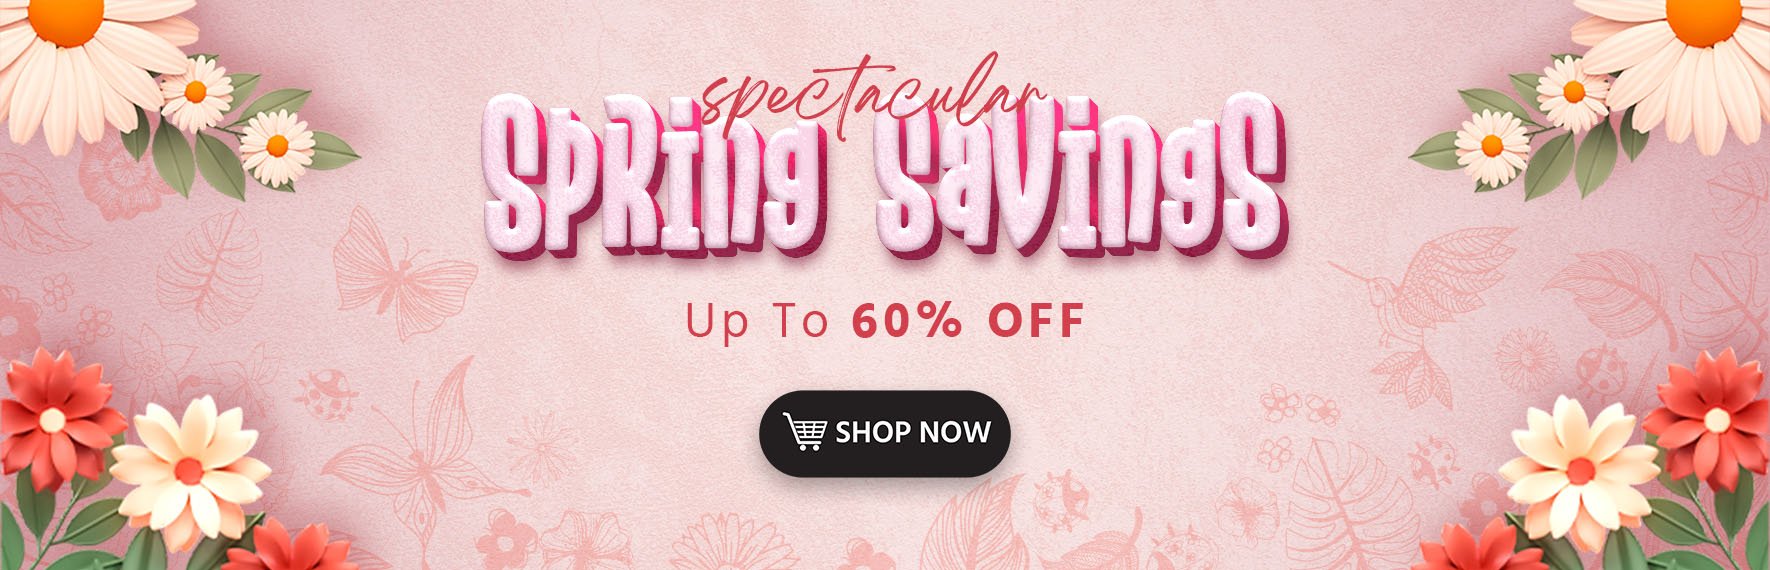 Save Up,Some More Spectacular Spring Savings Up to 60% OFF Shop Now